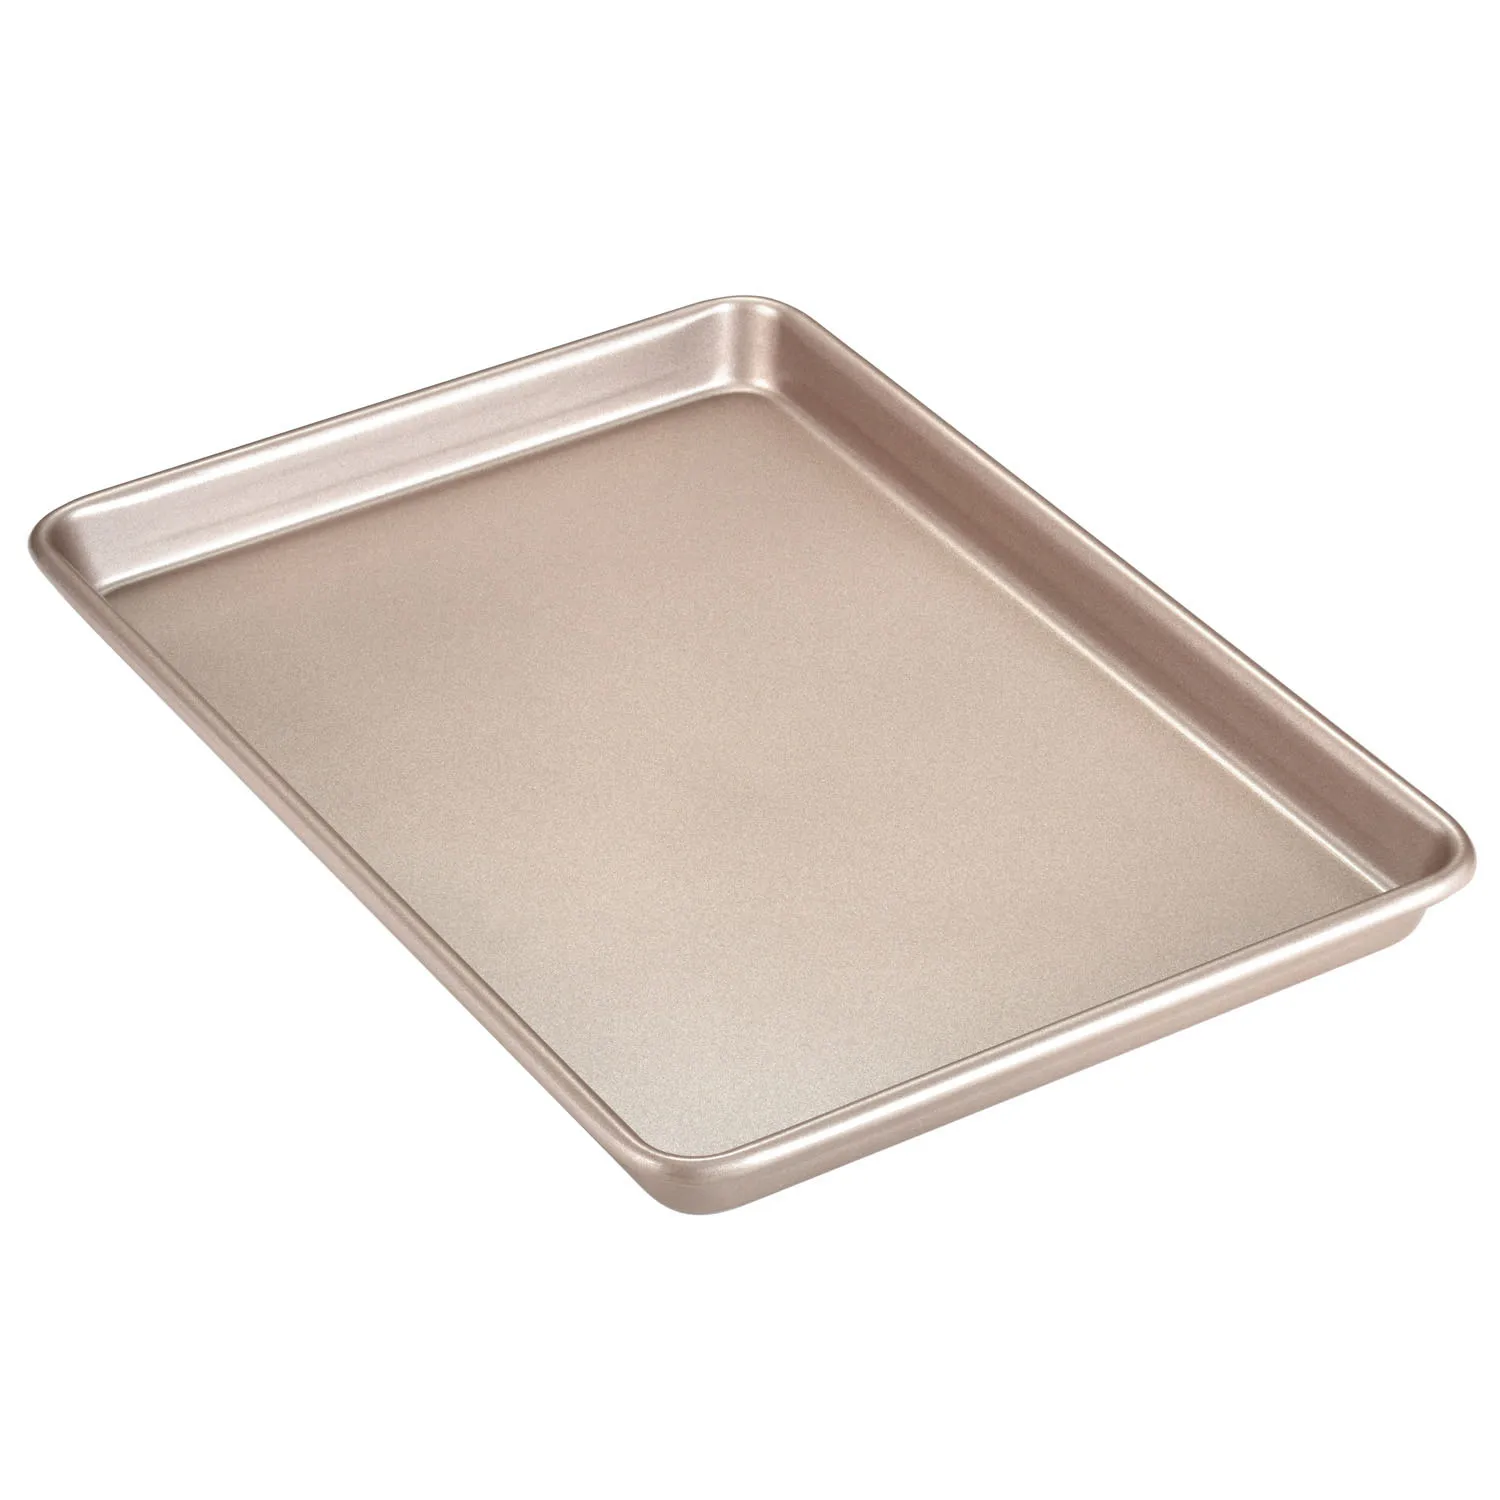 CHEFMADE 17-Inch Baking Sheet Pan, Non-Stick Carbon Steel Rimmed